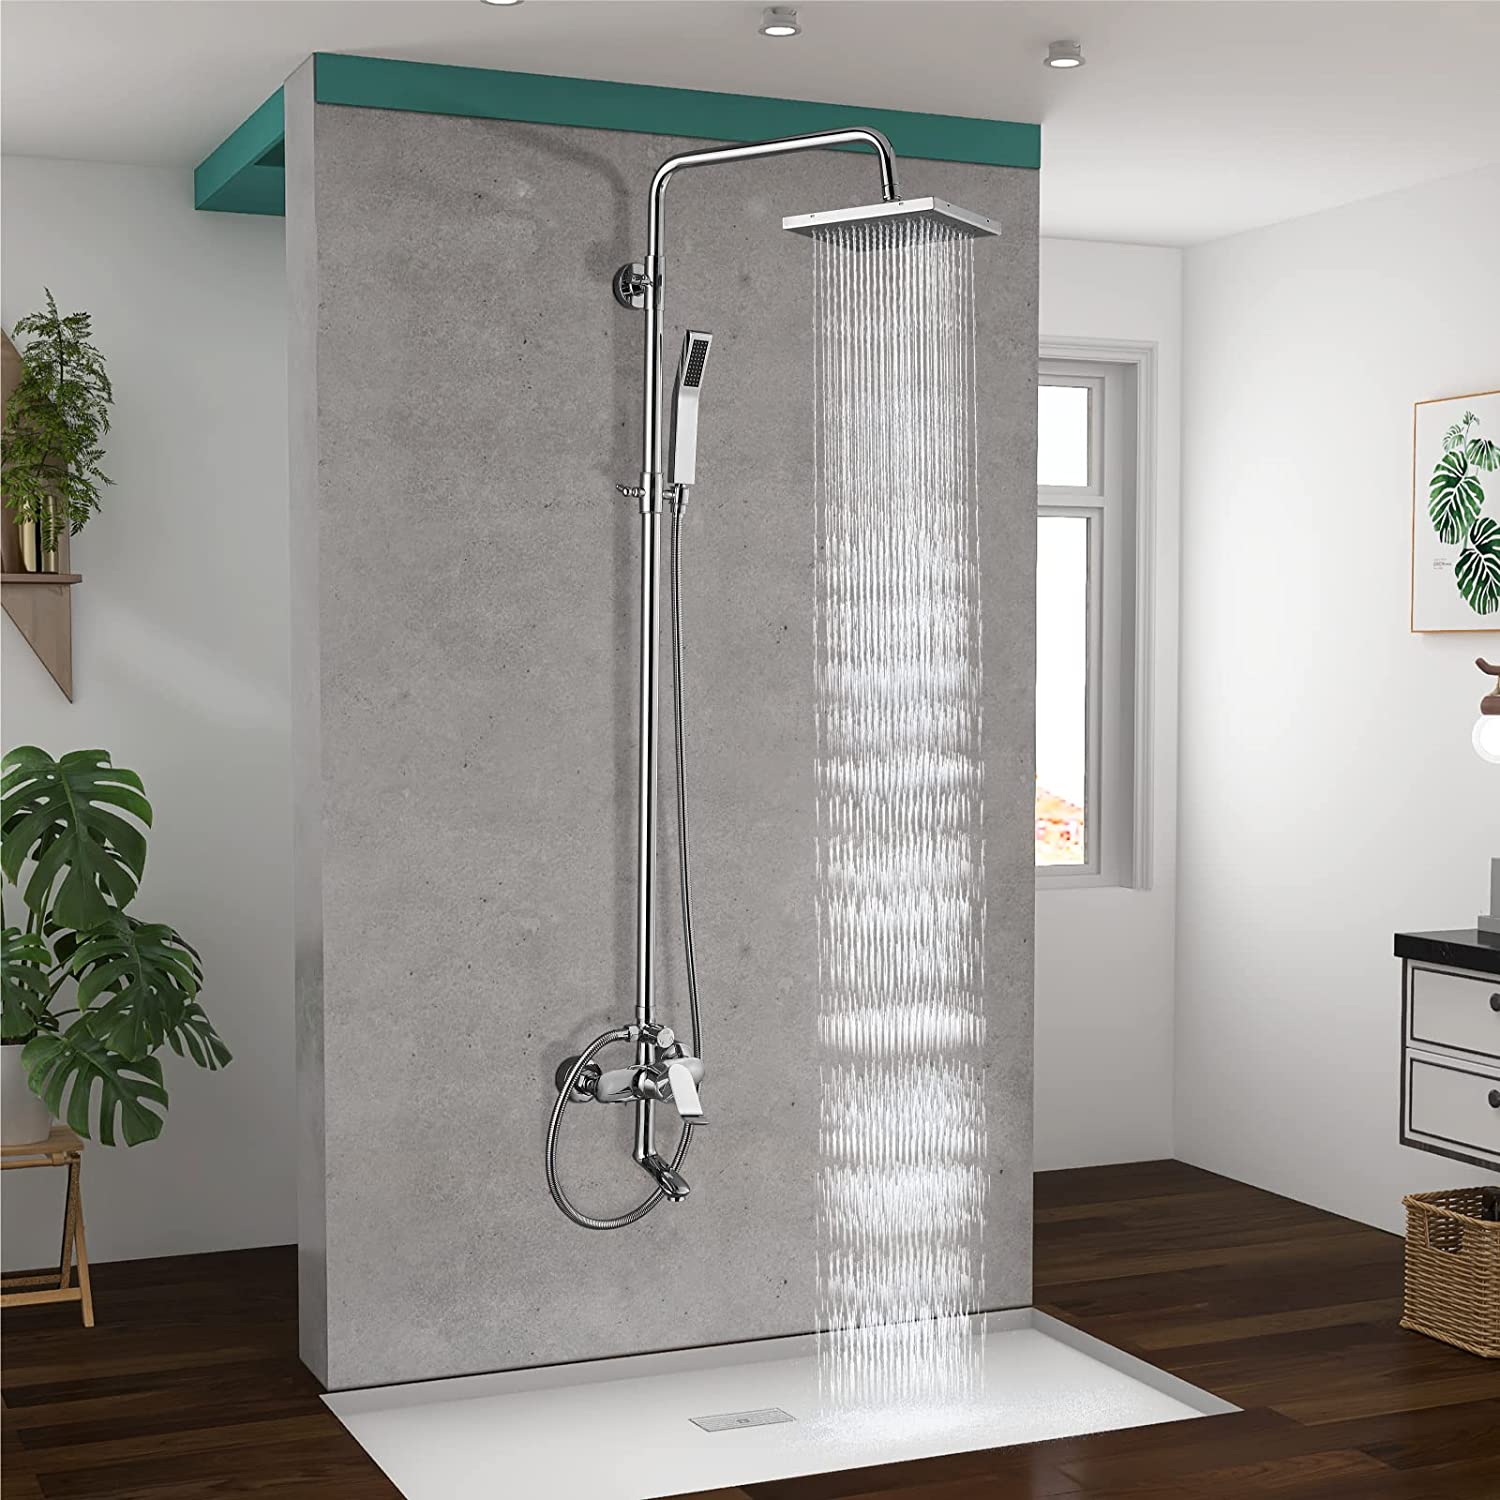 3 Functional Bathroom Shower Set 8 Inch Square Rainfall Shower Head with Wall Mounted